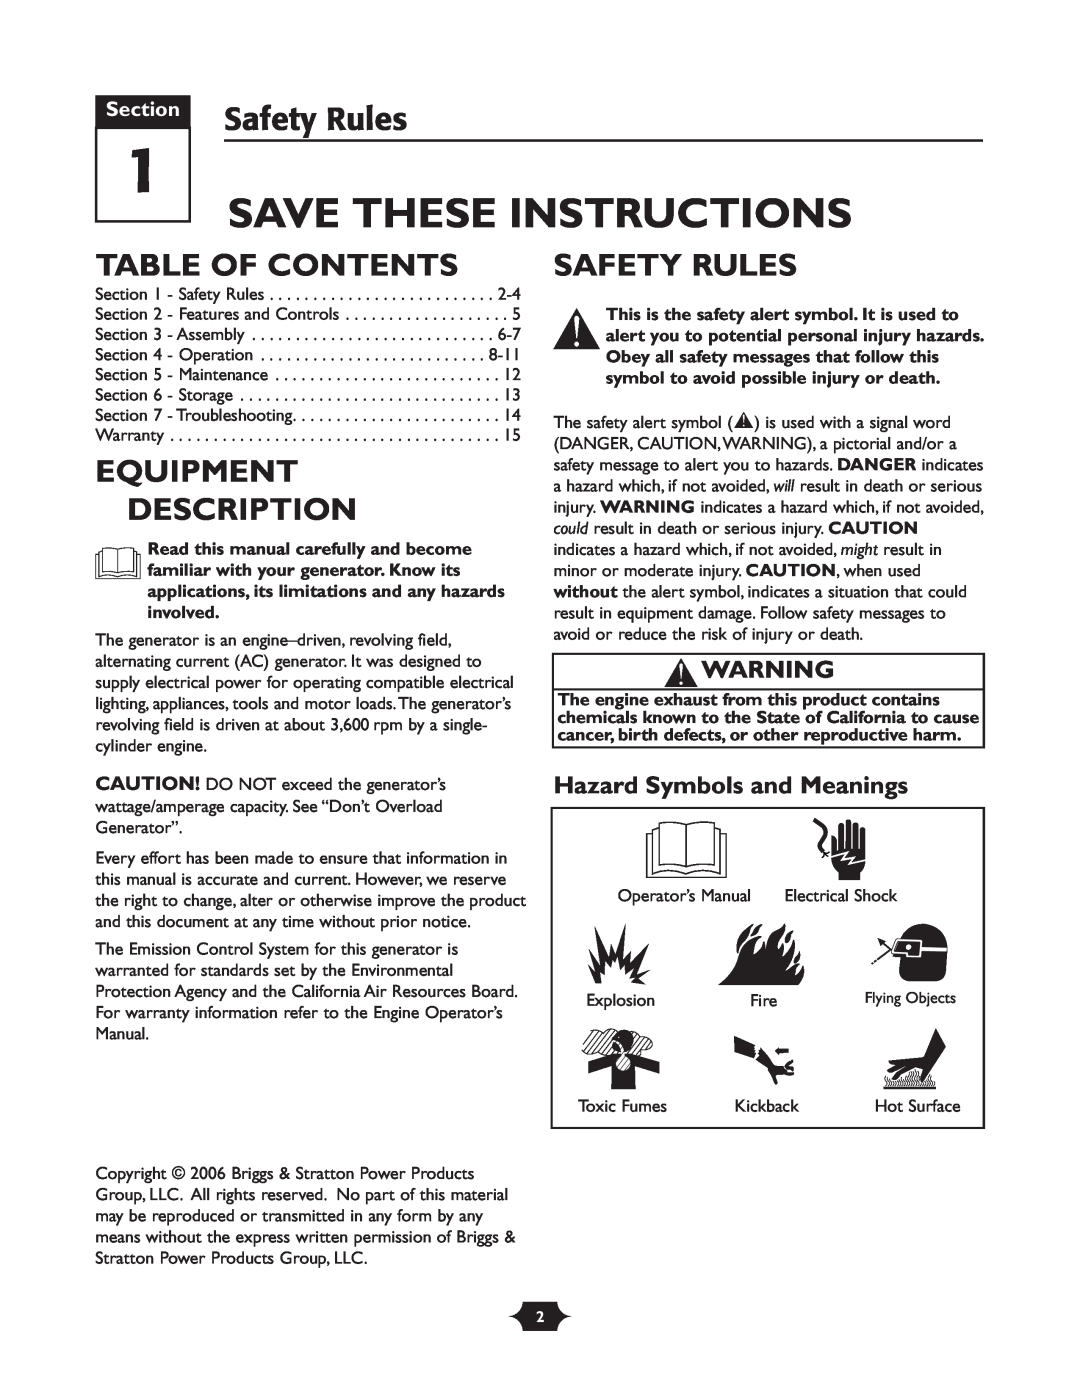 Troy-Bilt 030245 manual Safety Rules, Table Of Contents, Equipment Description, Hazard Symbols and Meanings, Section 